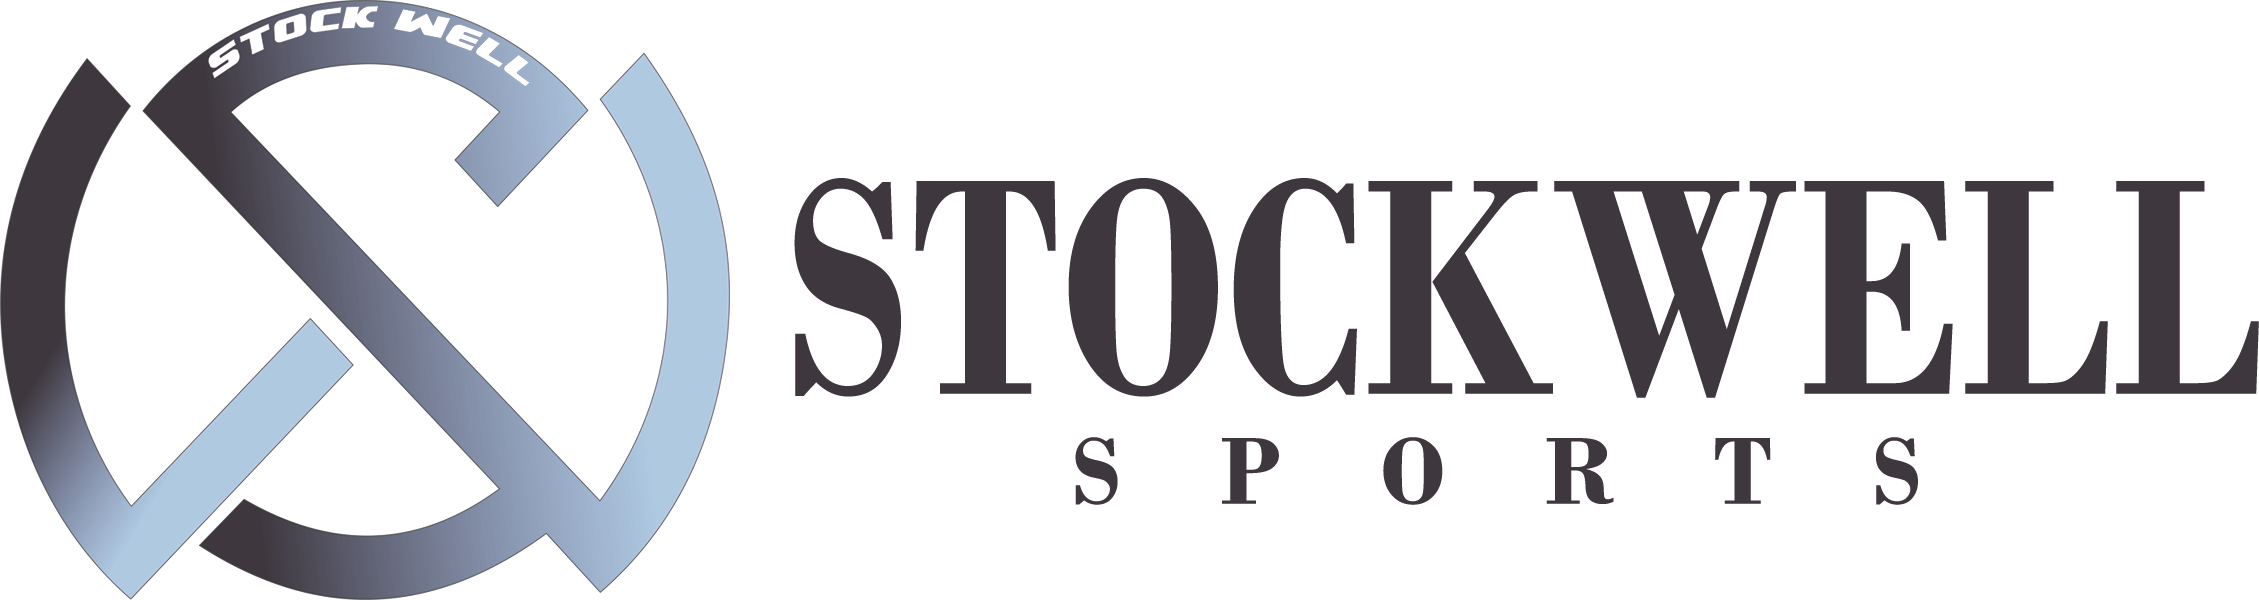 Stock Well Sports